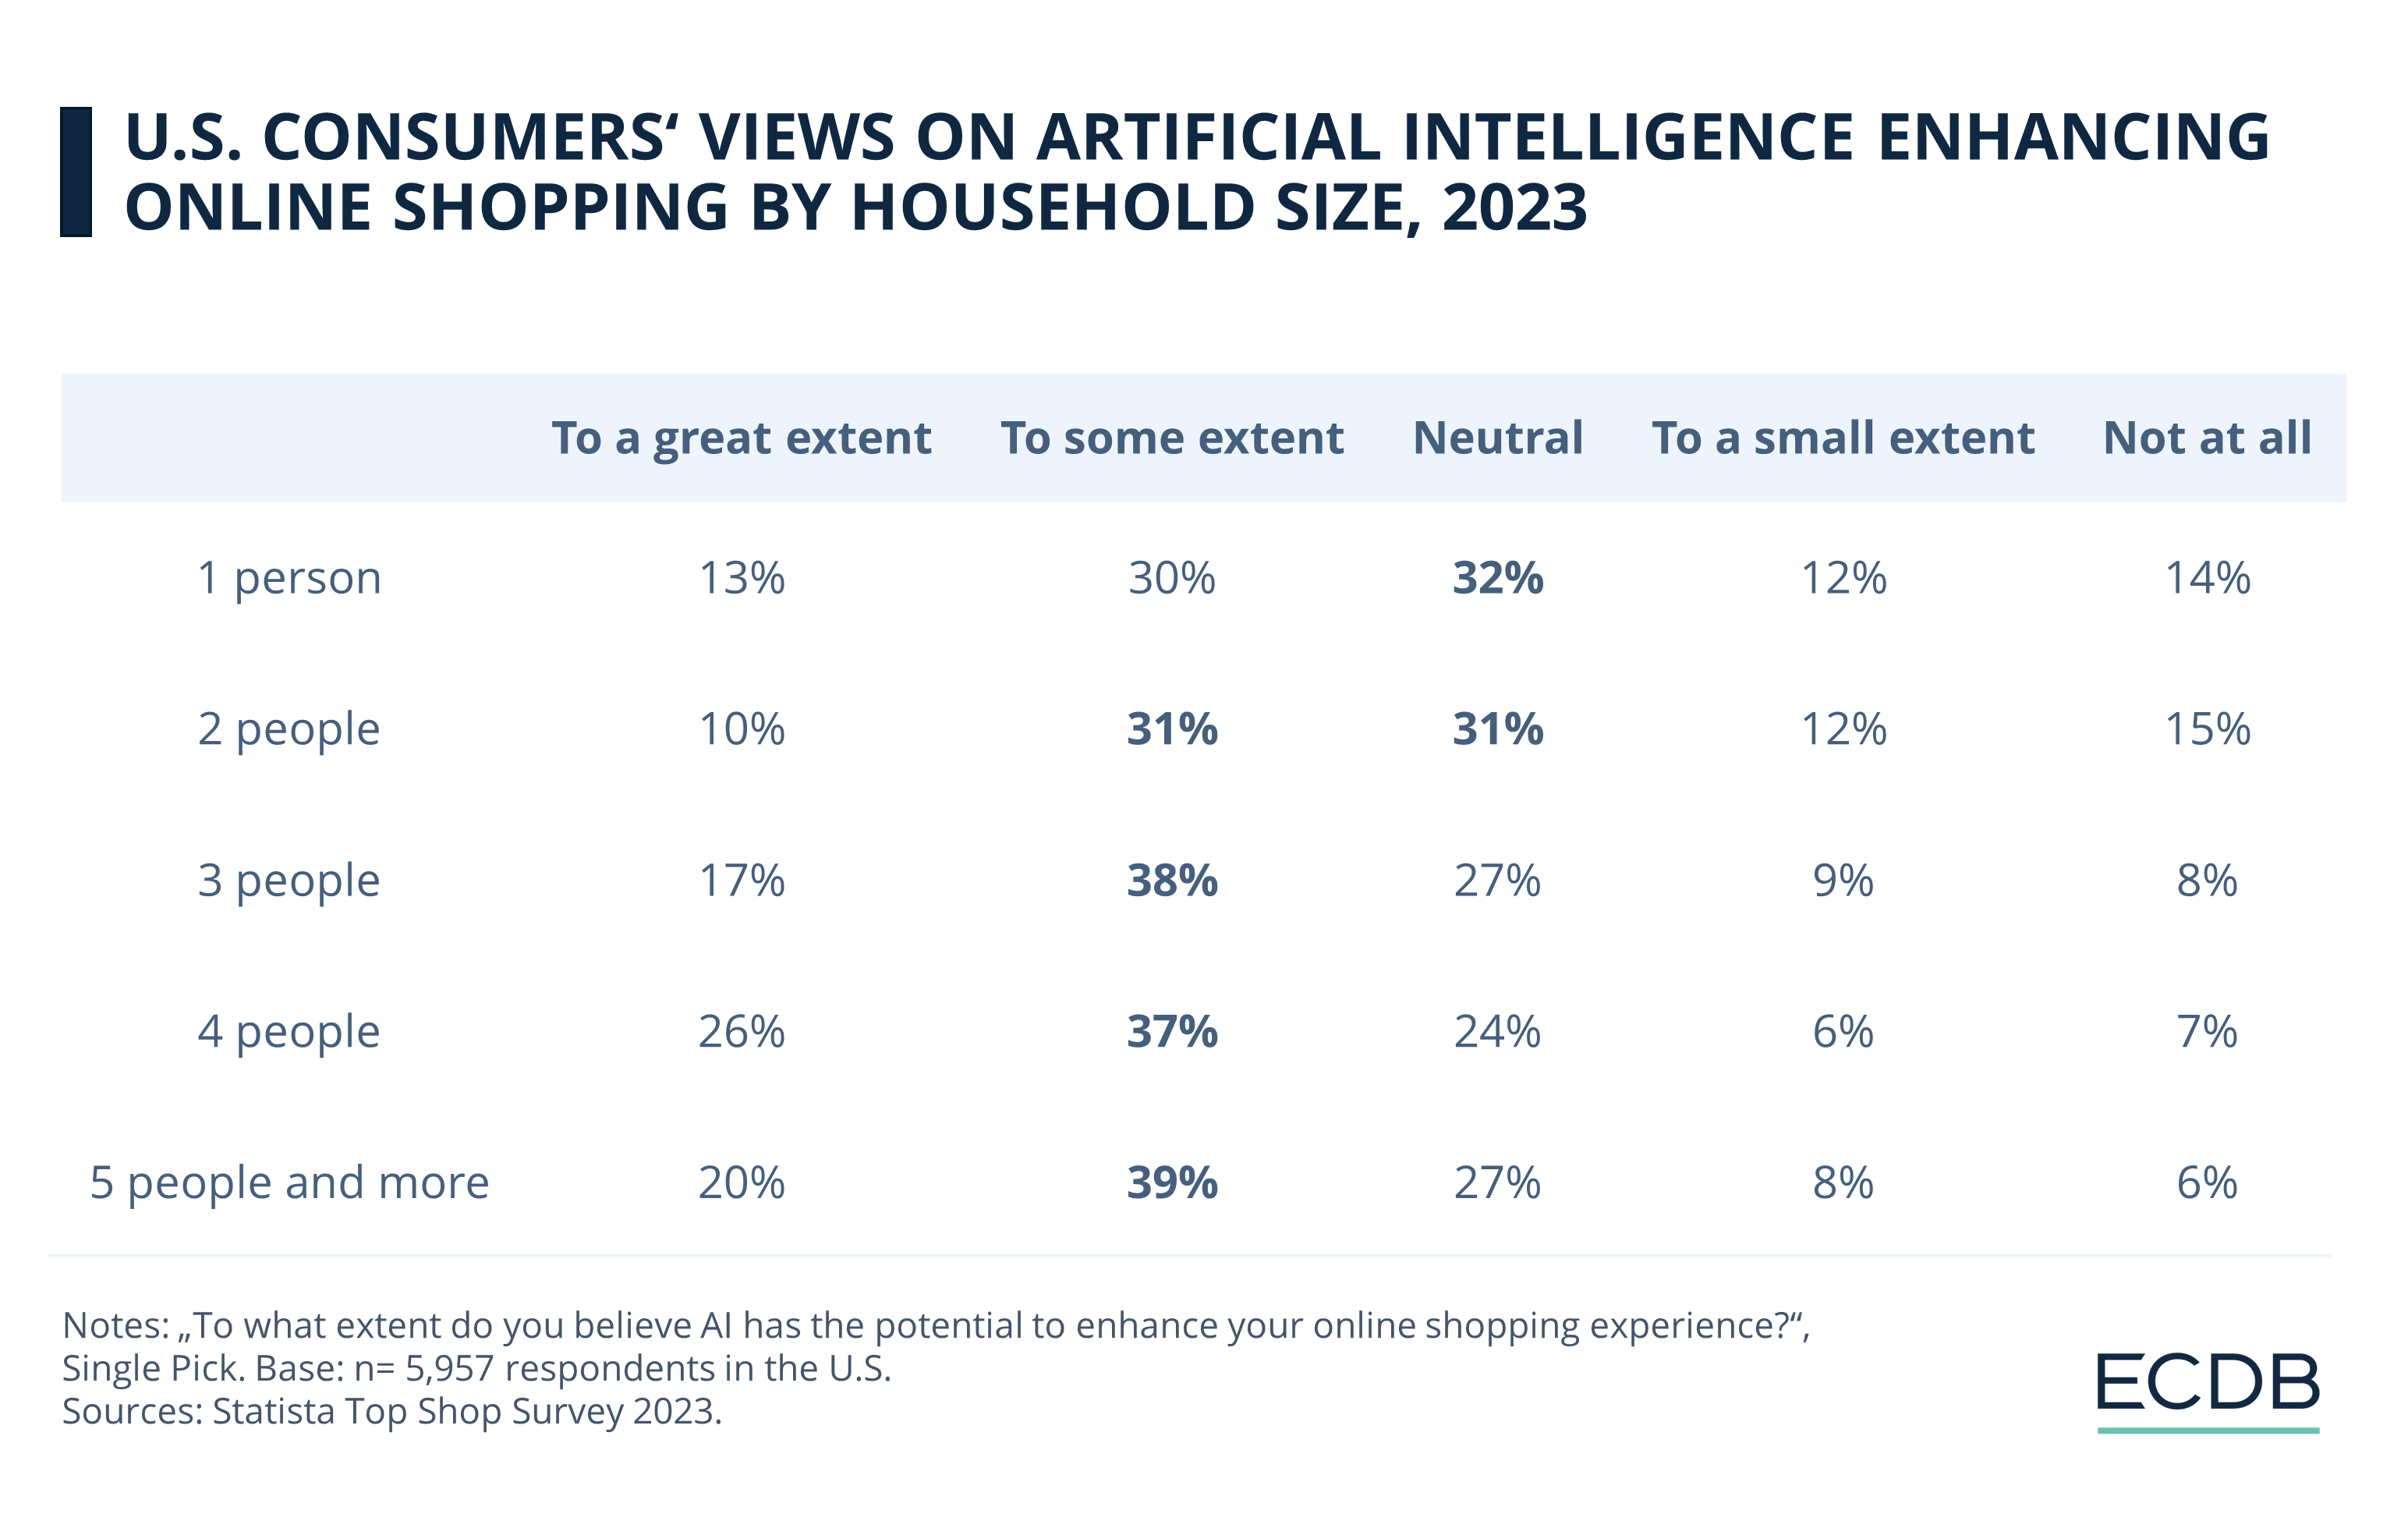 U.S. Consumers' View on Artificial Intelligence Enhancing Online Shopping by Household Size, 2023